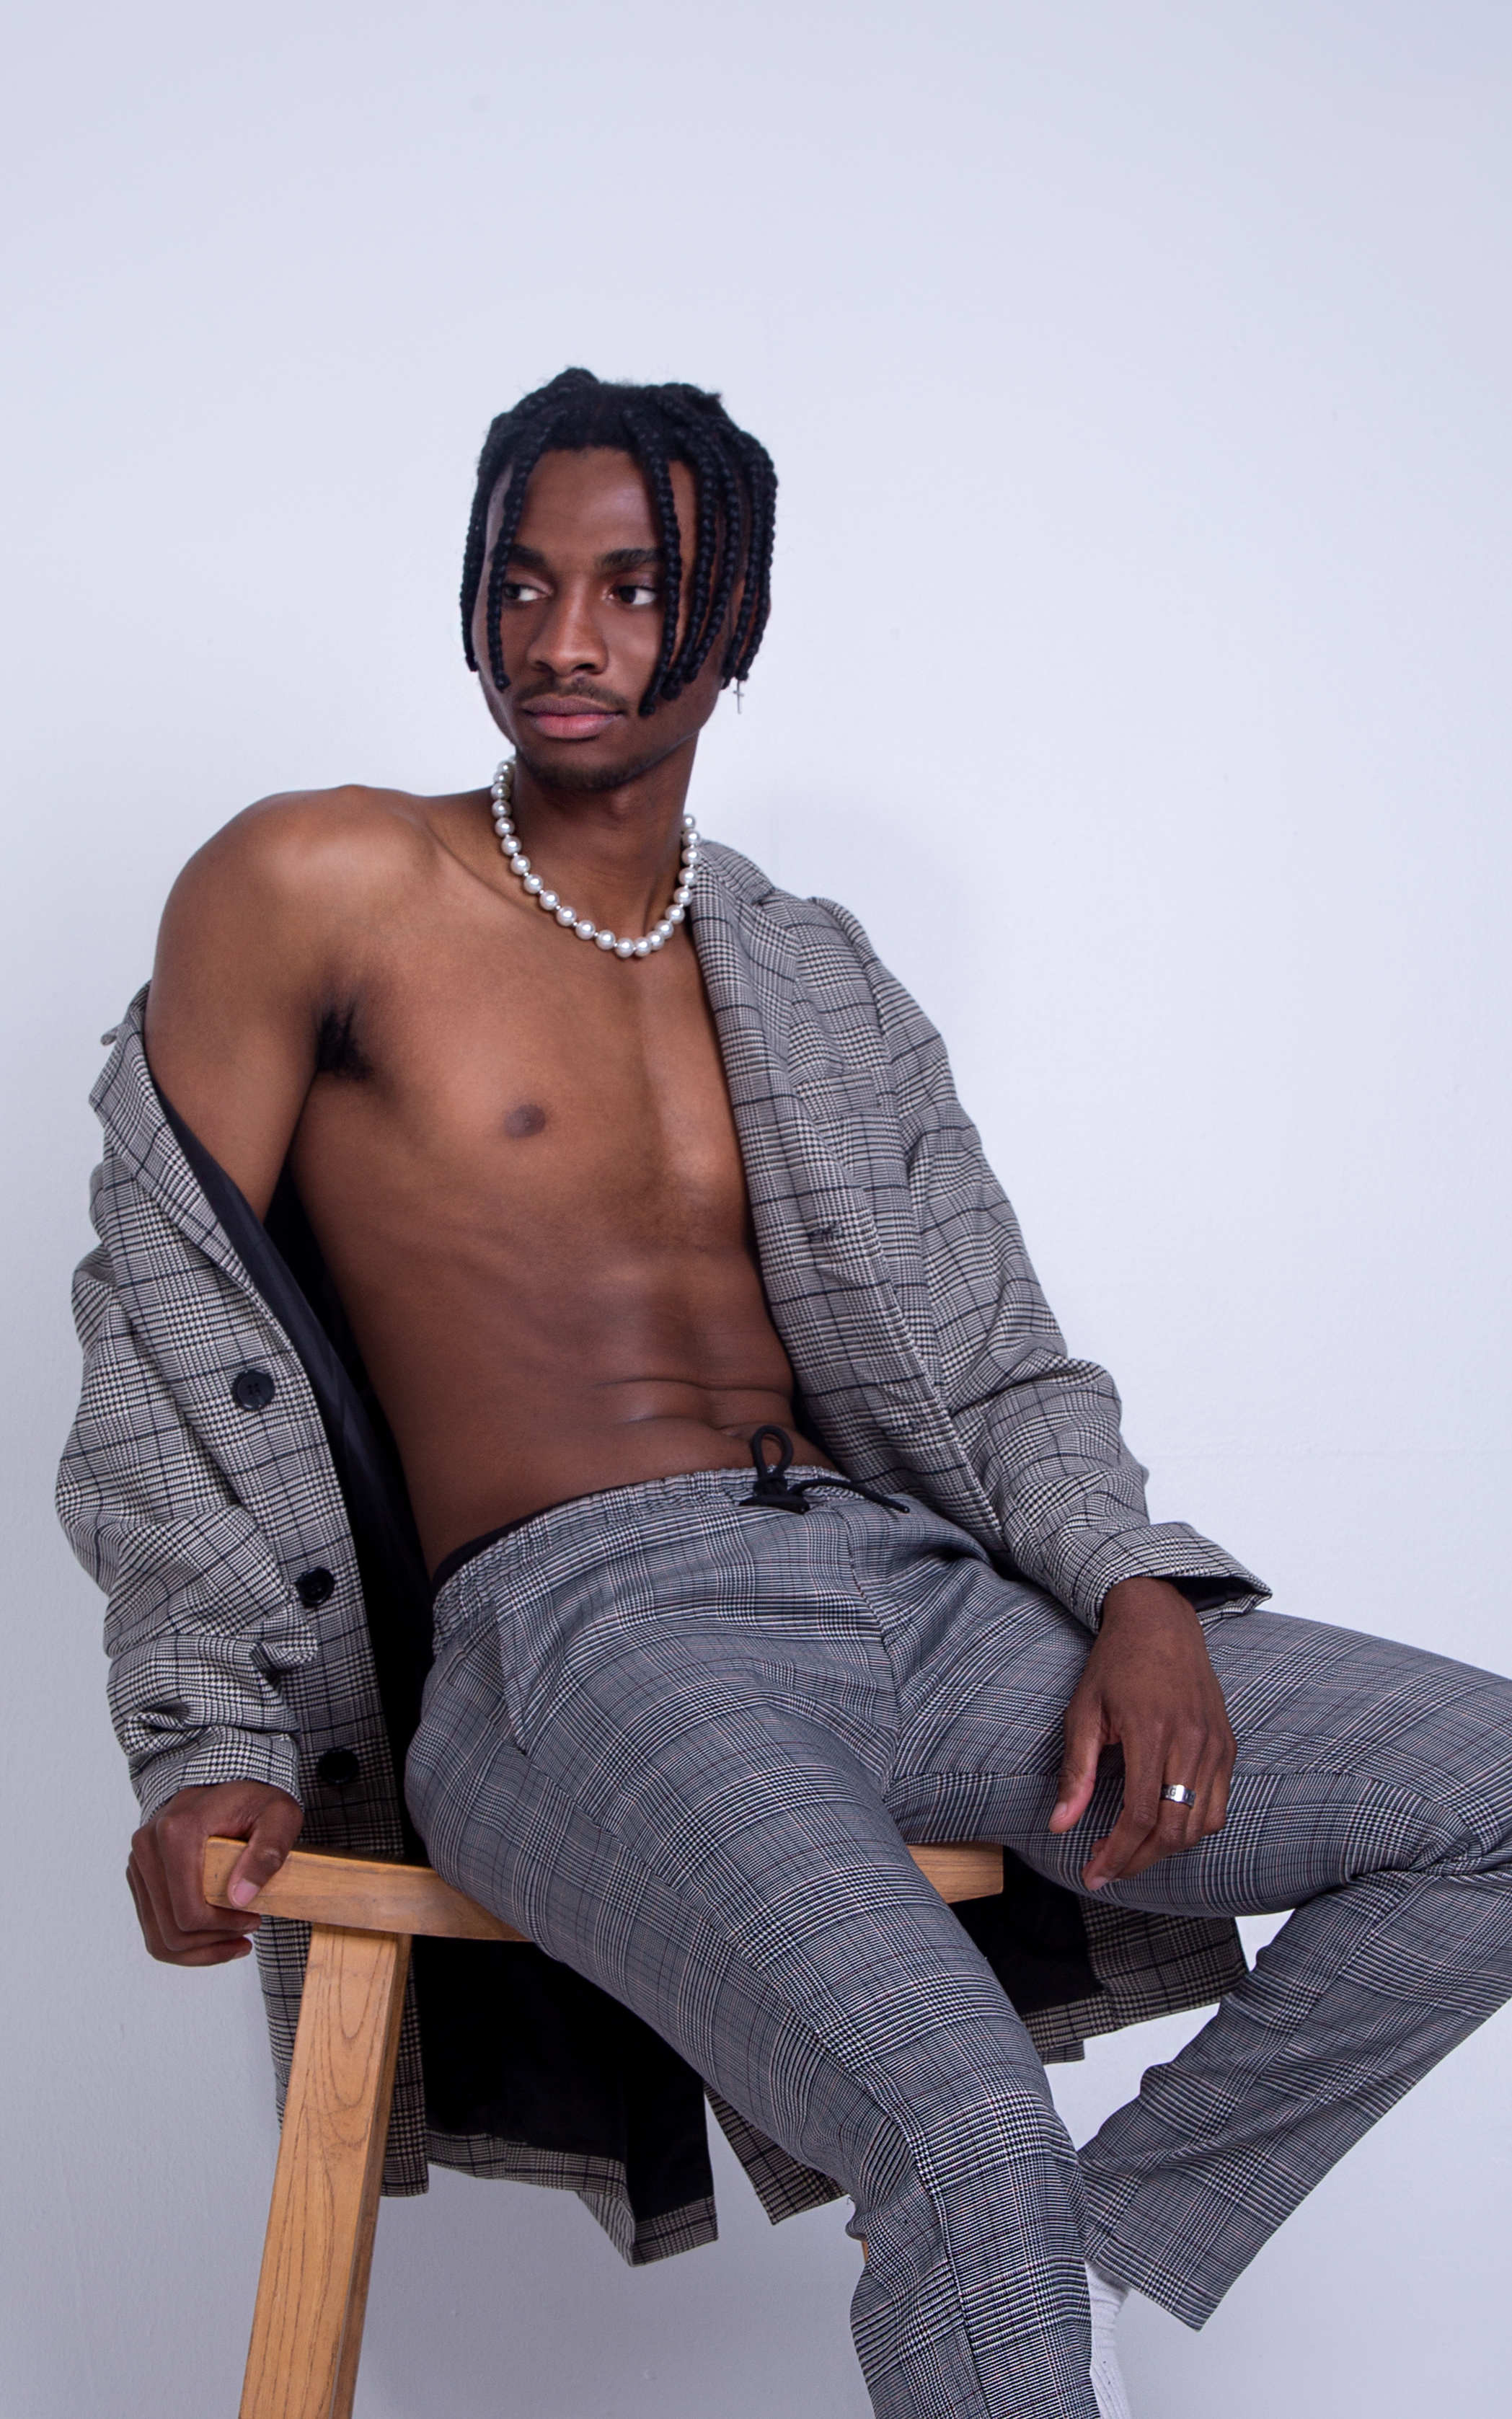 Full body photograph of man sitting on a chair shirtless with a suit